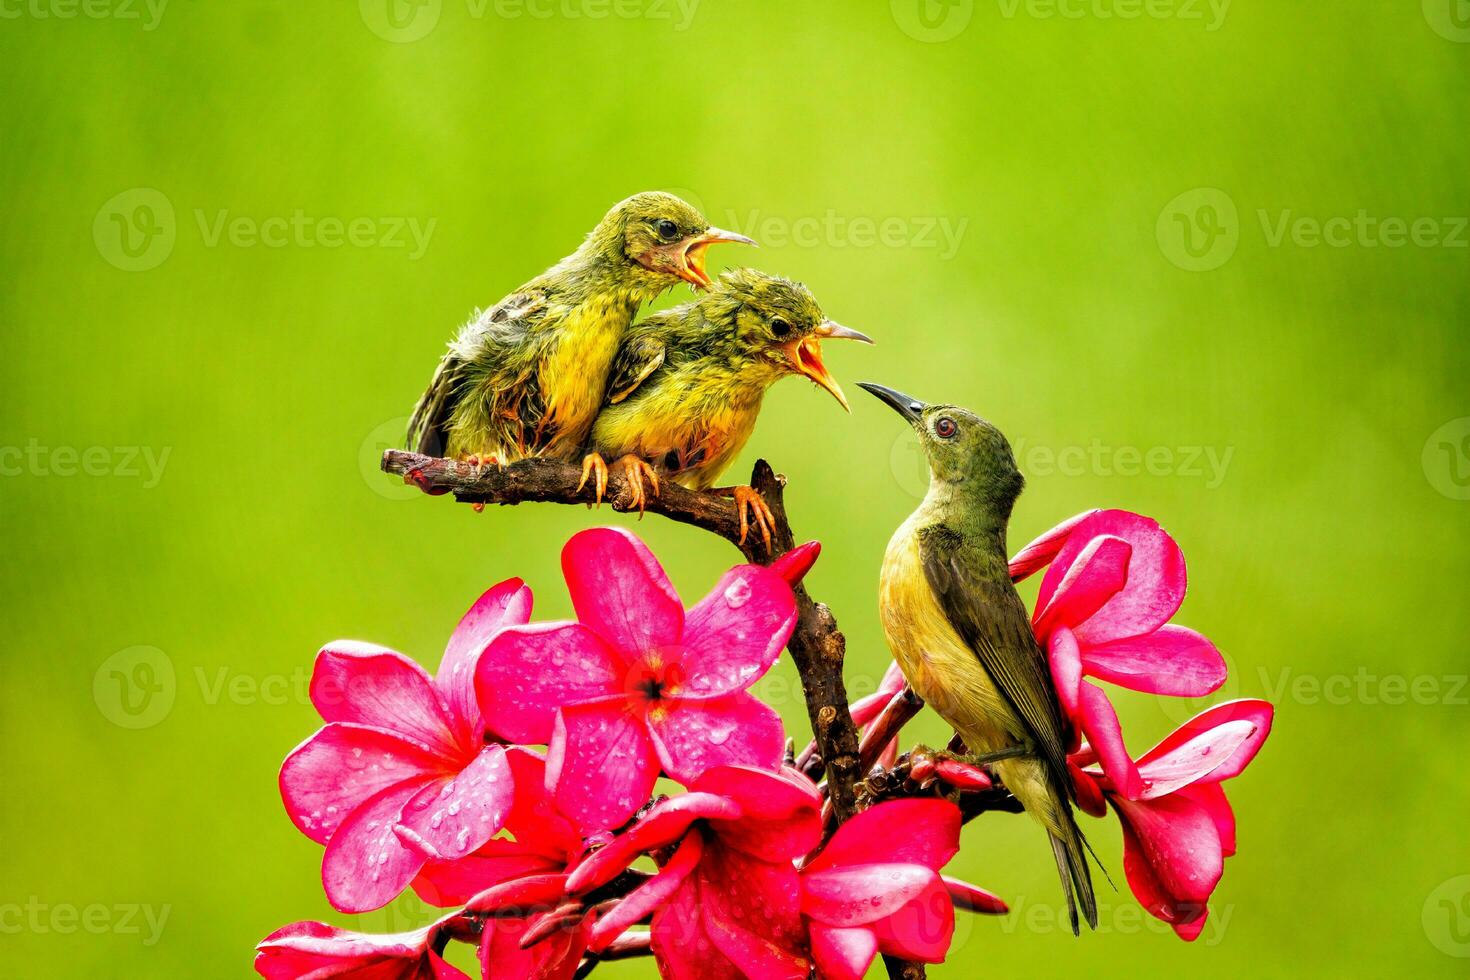 The Child Cinnyris Jugularis is Being Fed by Olive Backed Sunbird photo